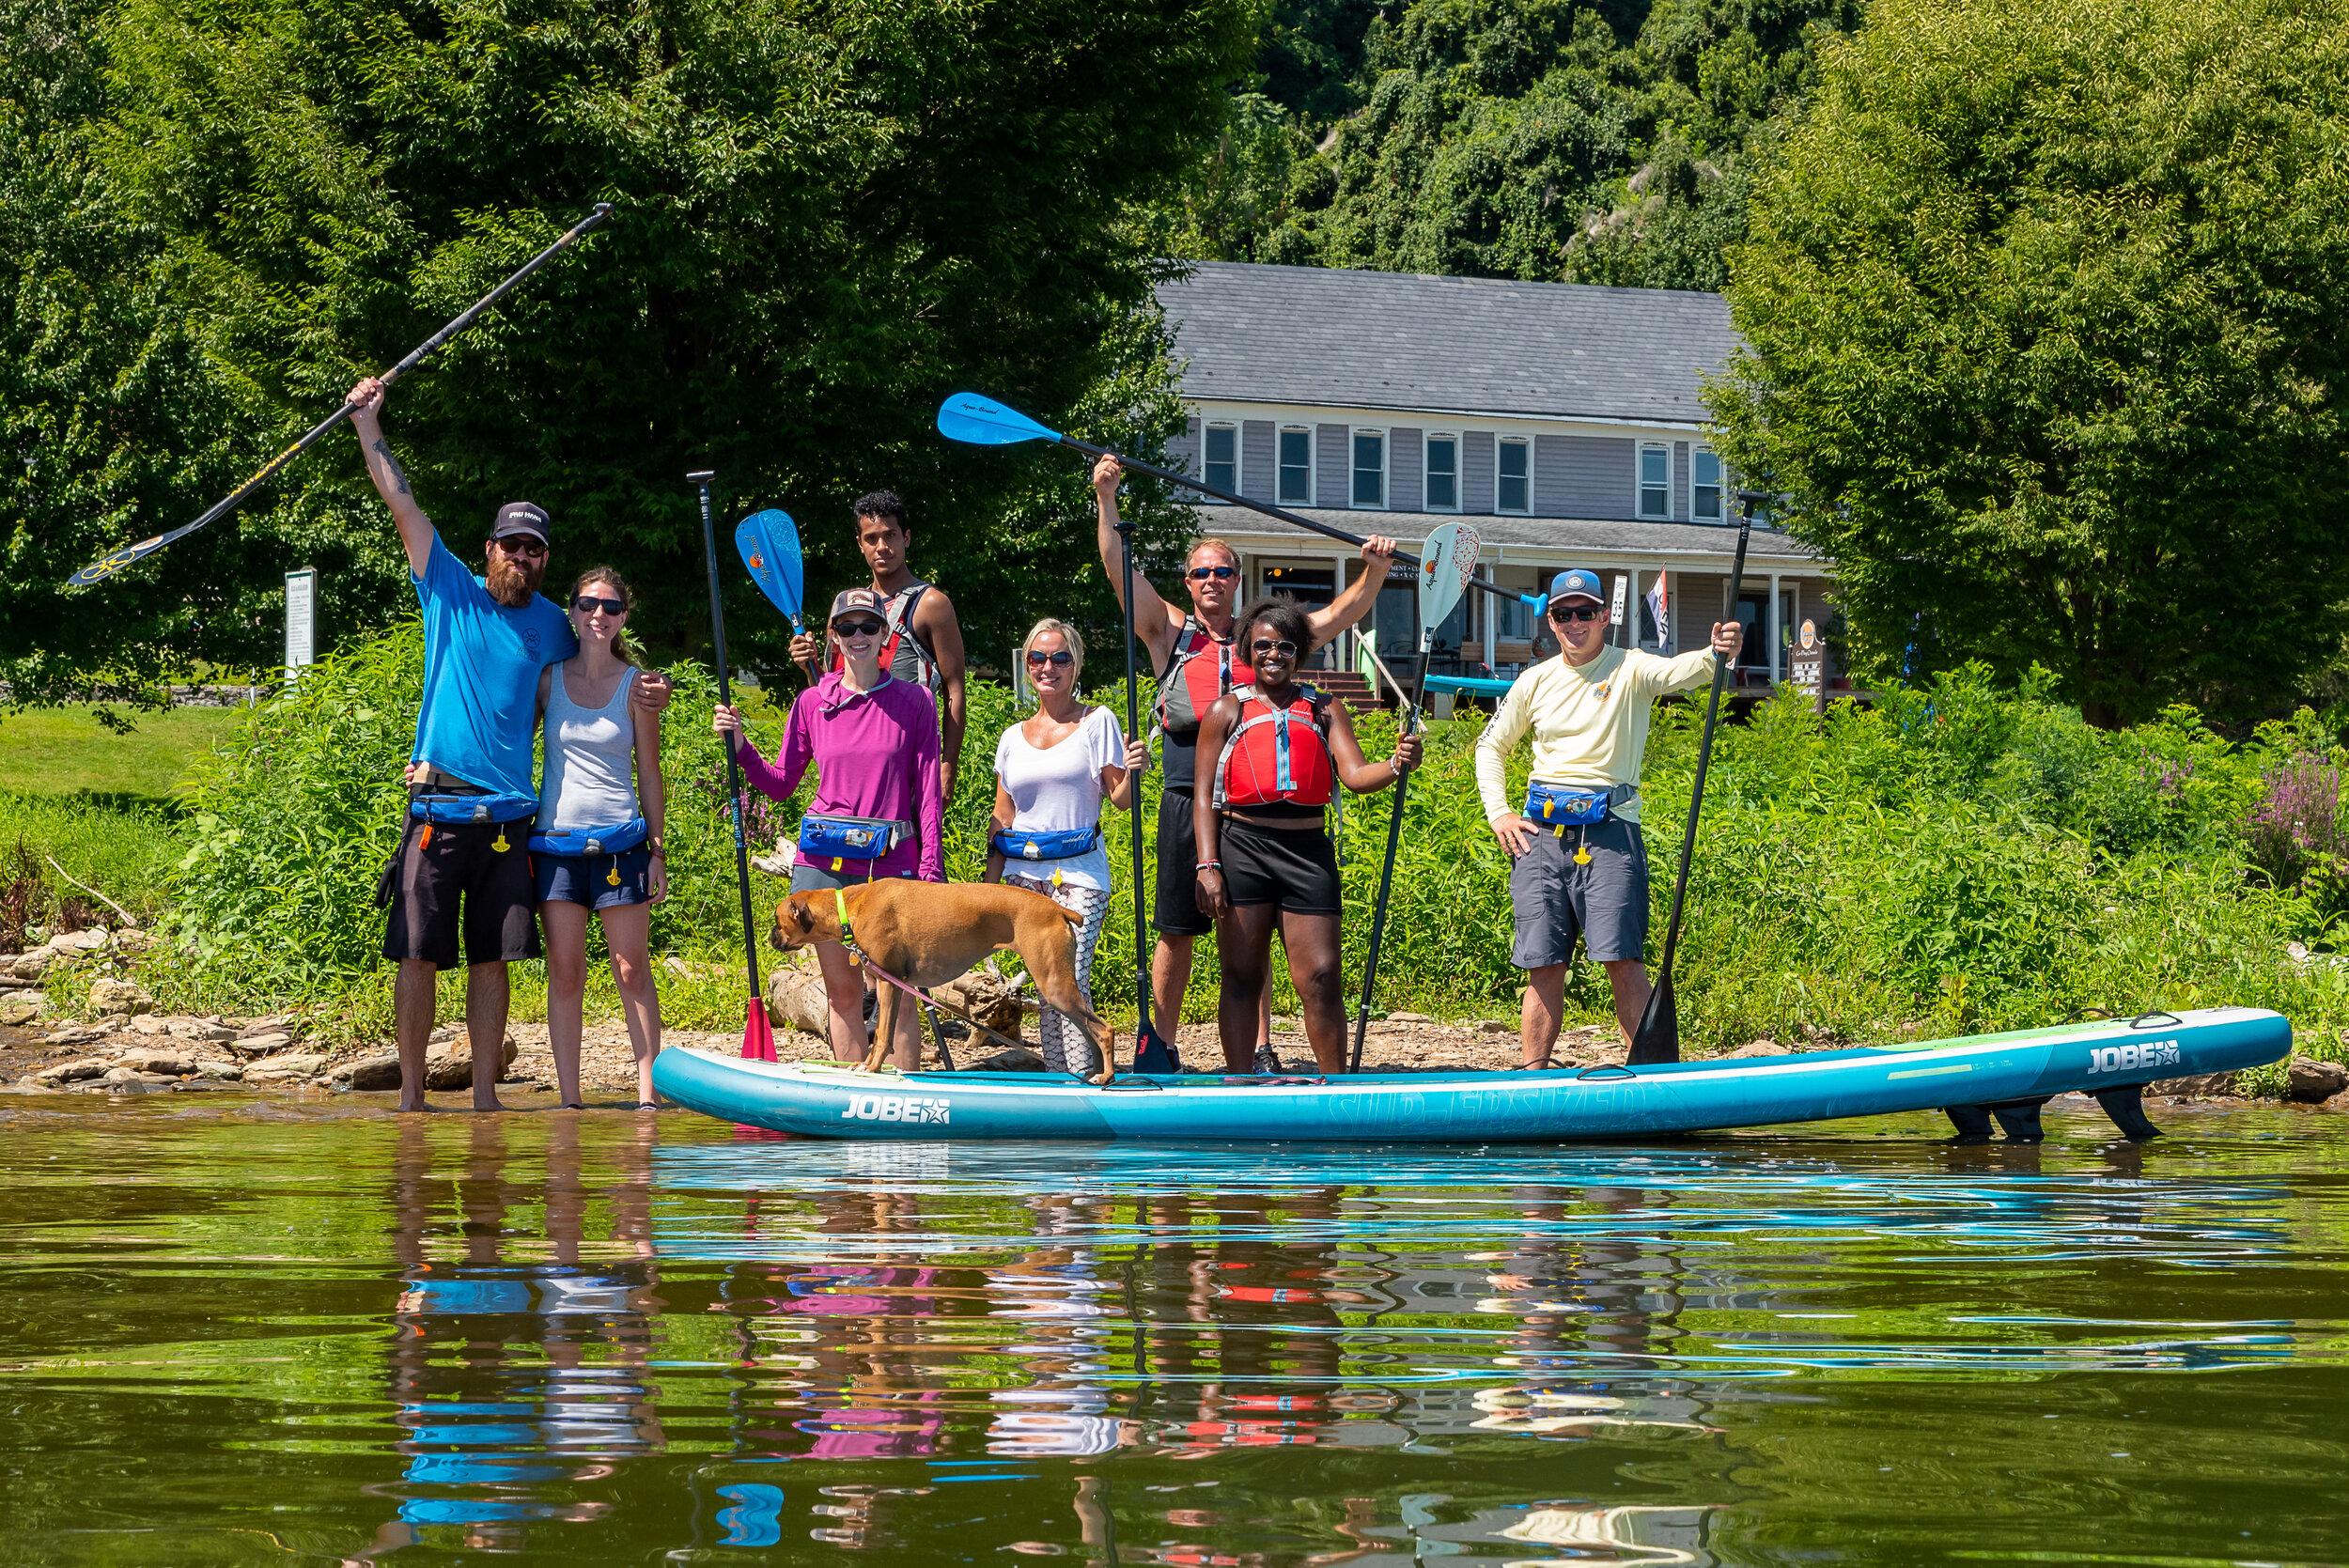 Group Paddle boarding at Shank's Mare Outfitters